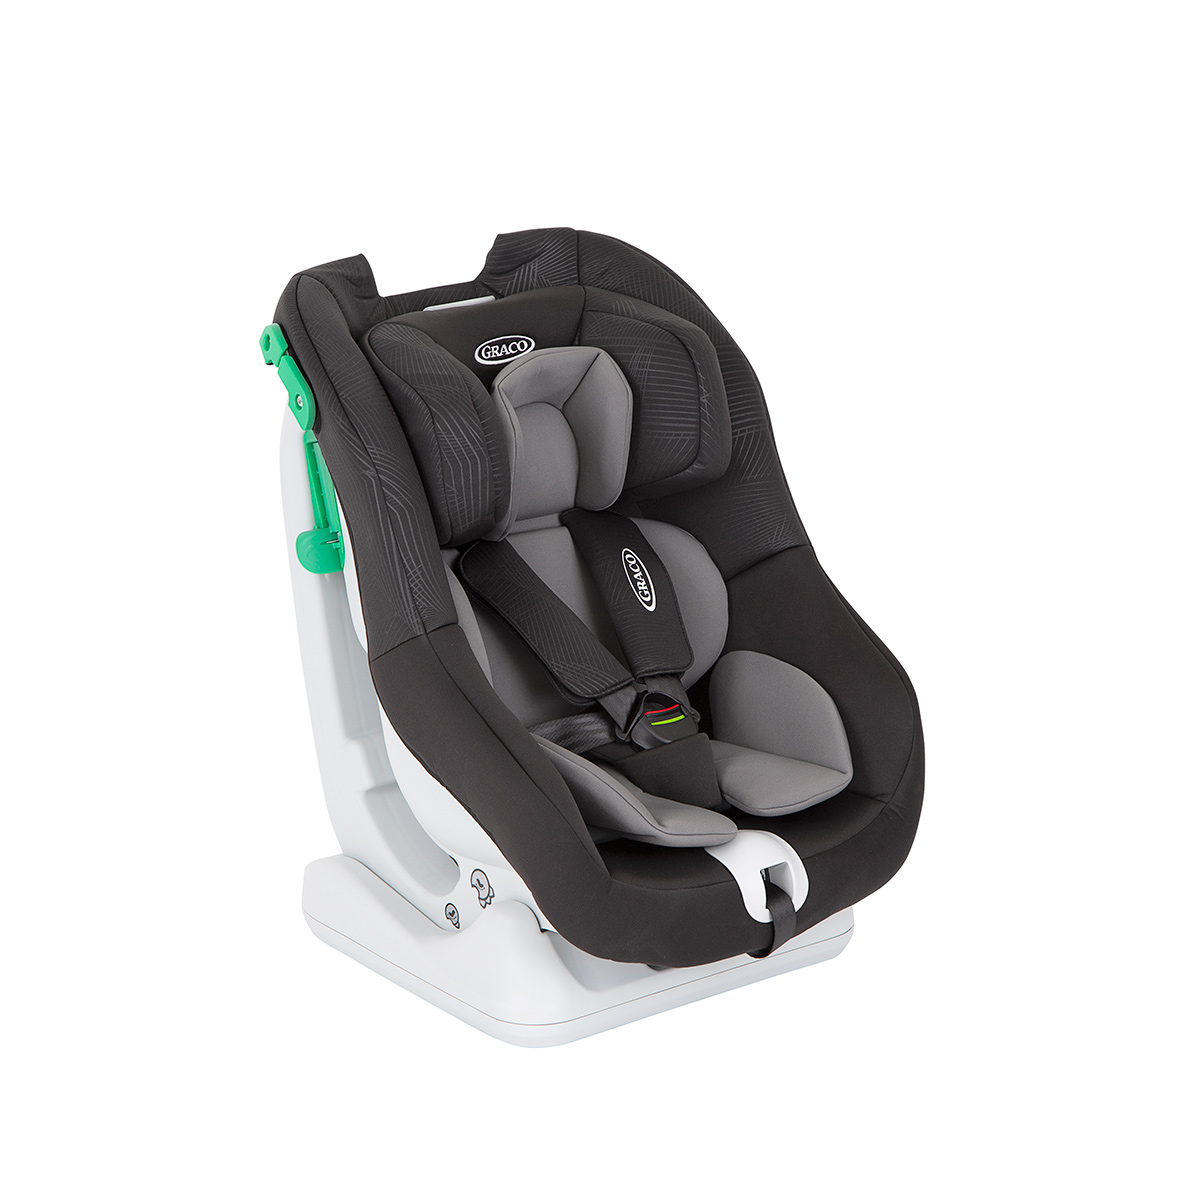 Three quarter angle of Graco Extend LX R129 convertible car seat